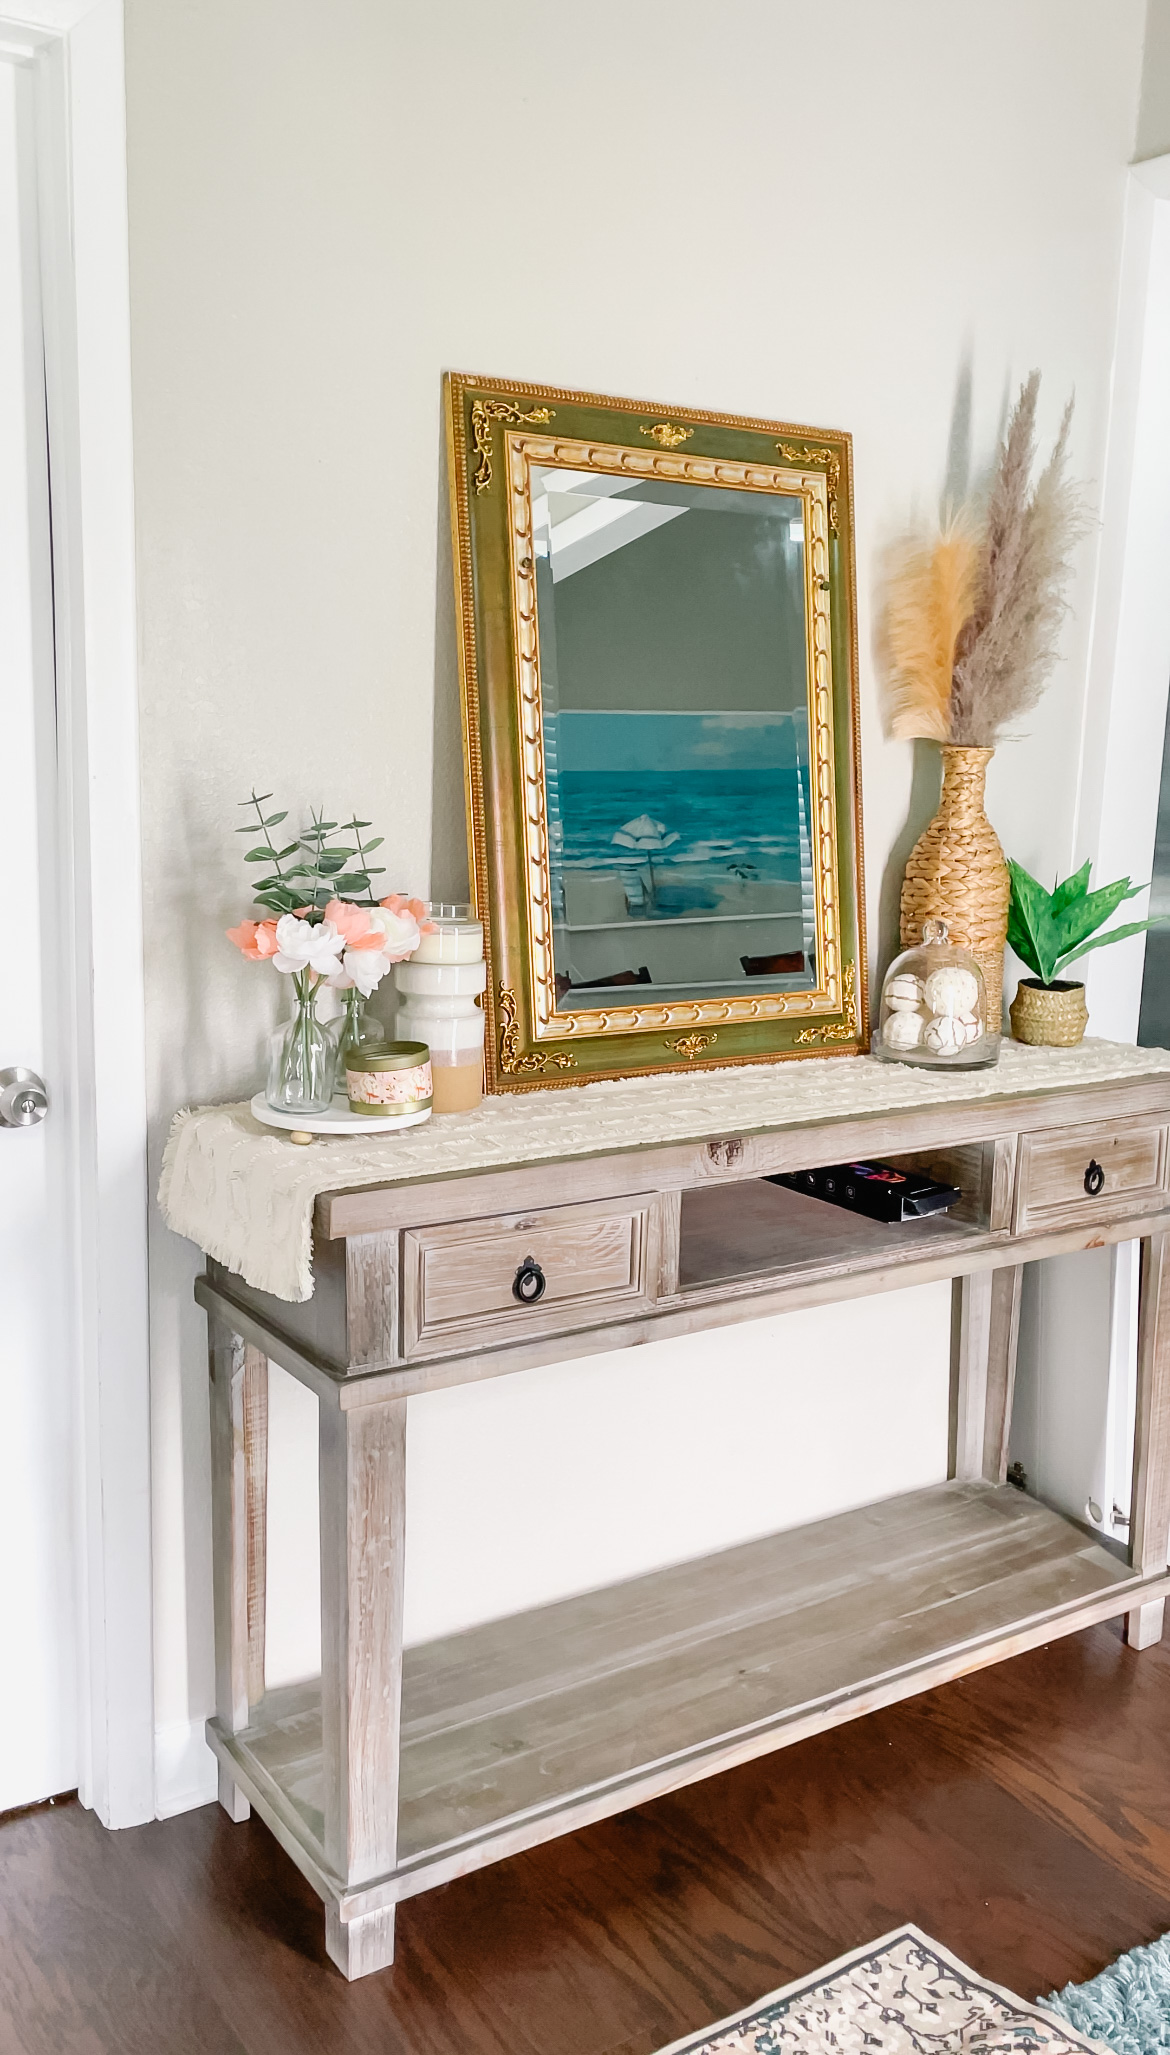 Target Home Decor Ideas: Spring 2021 | Affordable by Amanda | Entryway Console Table Home Decor